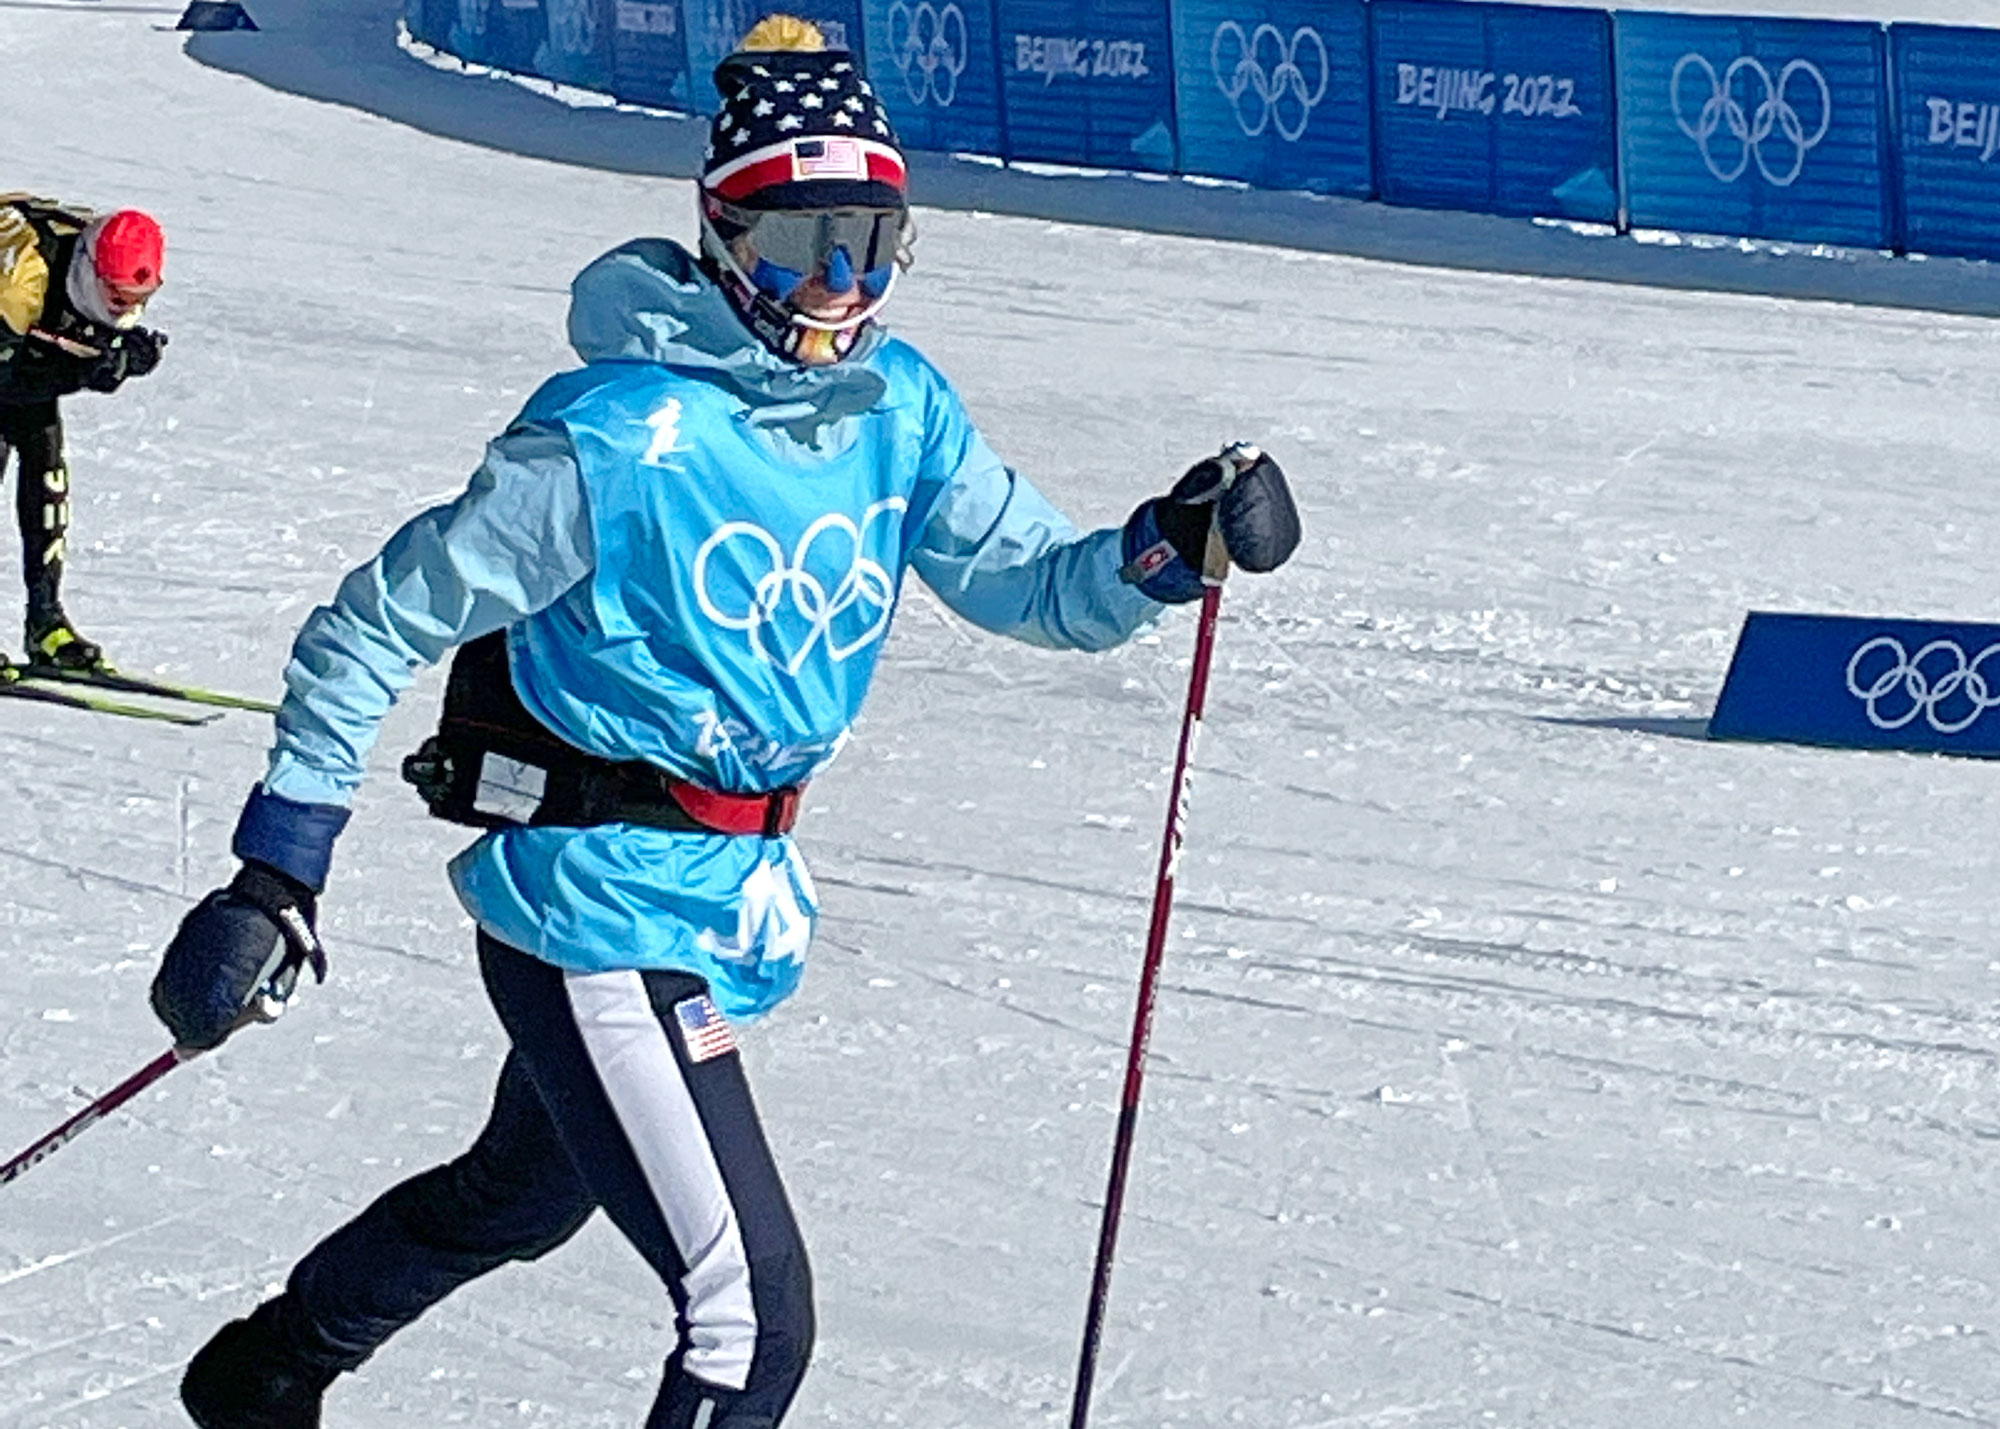 Novie McCabe Skis to 24th place in Women’s 10km Classic in Impressive Olympics Cross Country Debut: Diggins finishes 8th